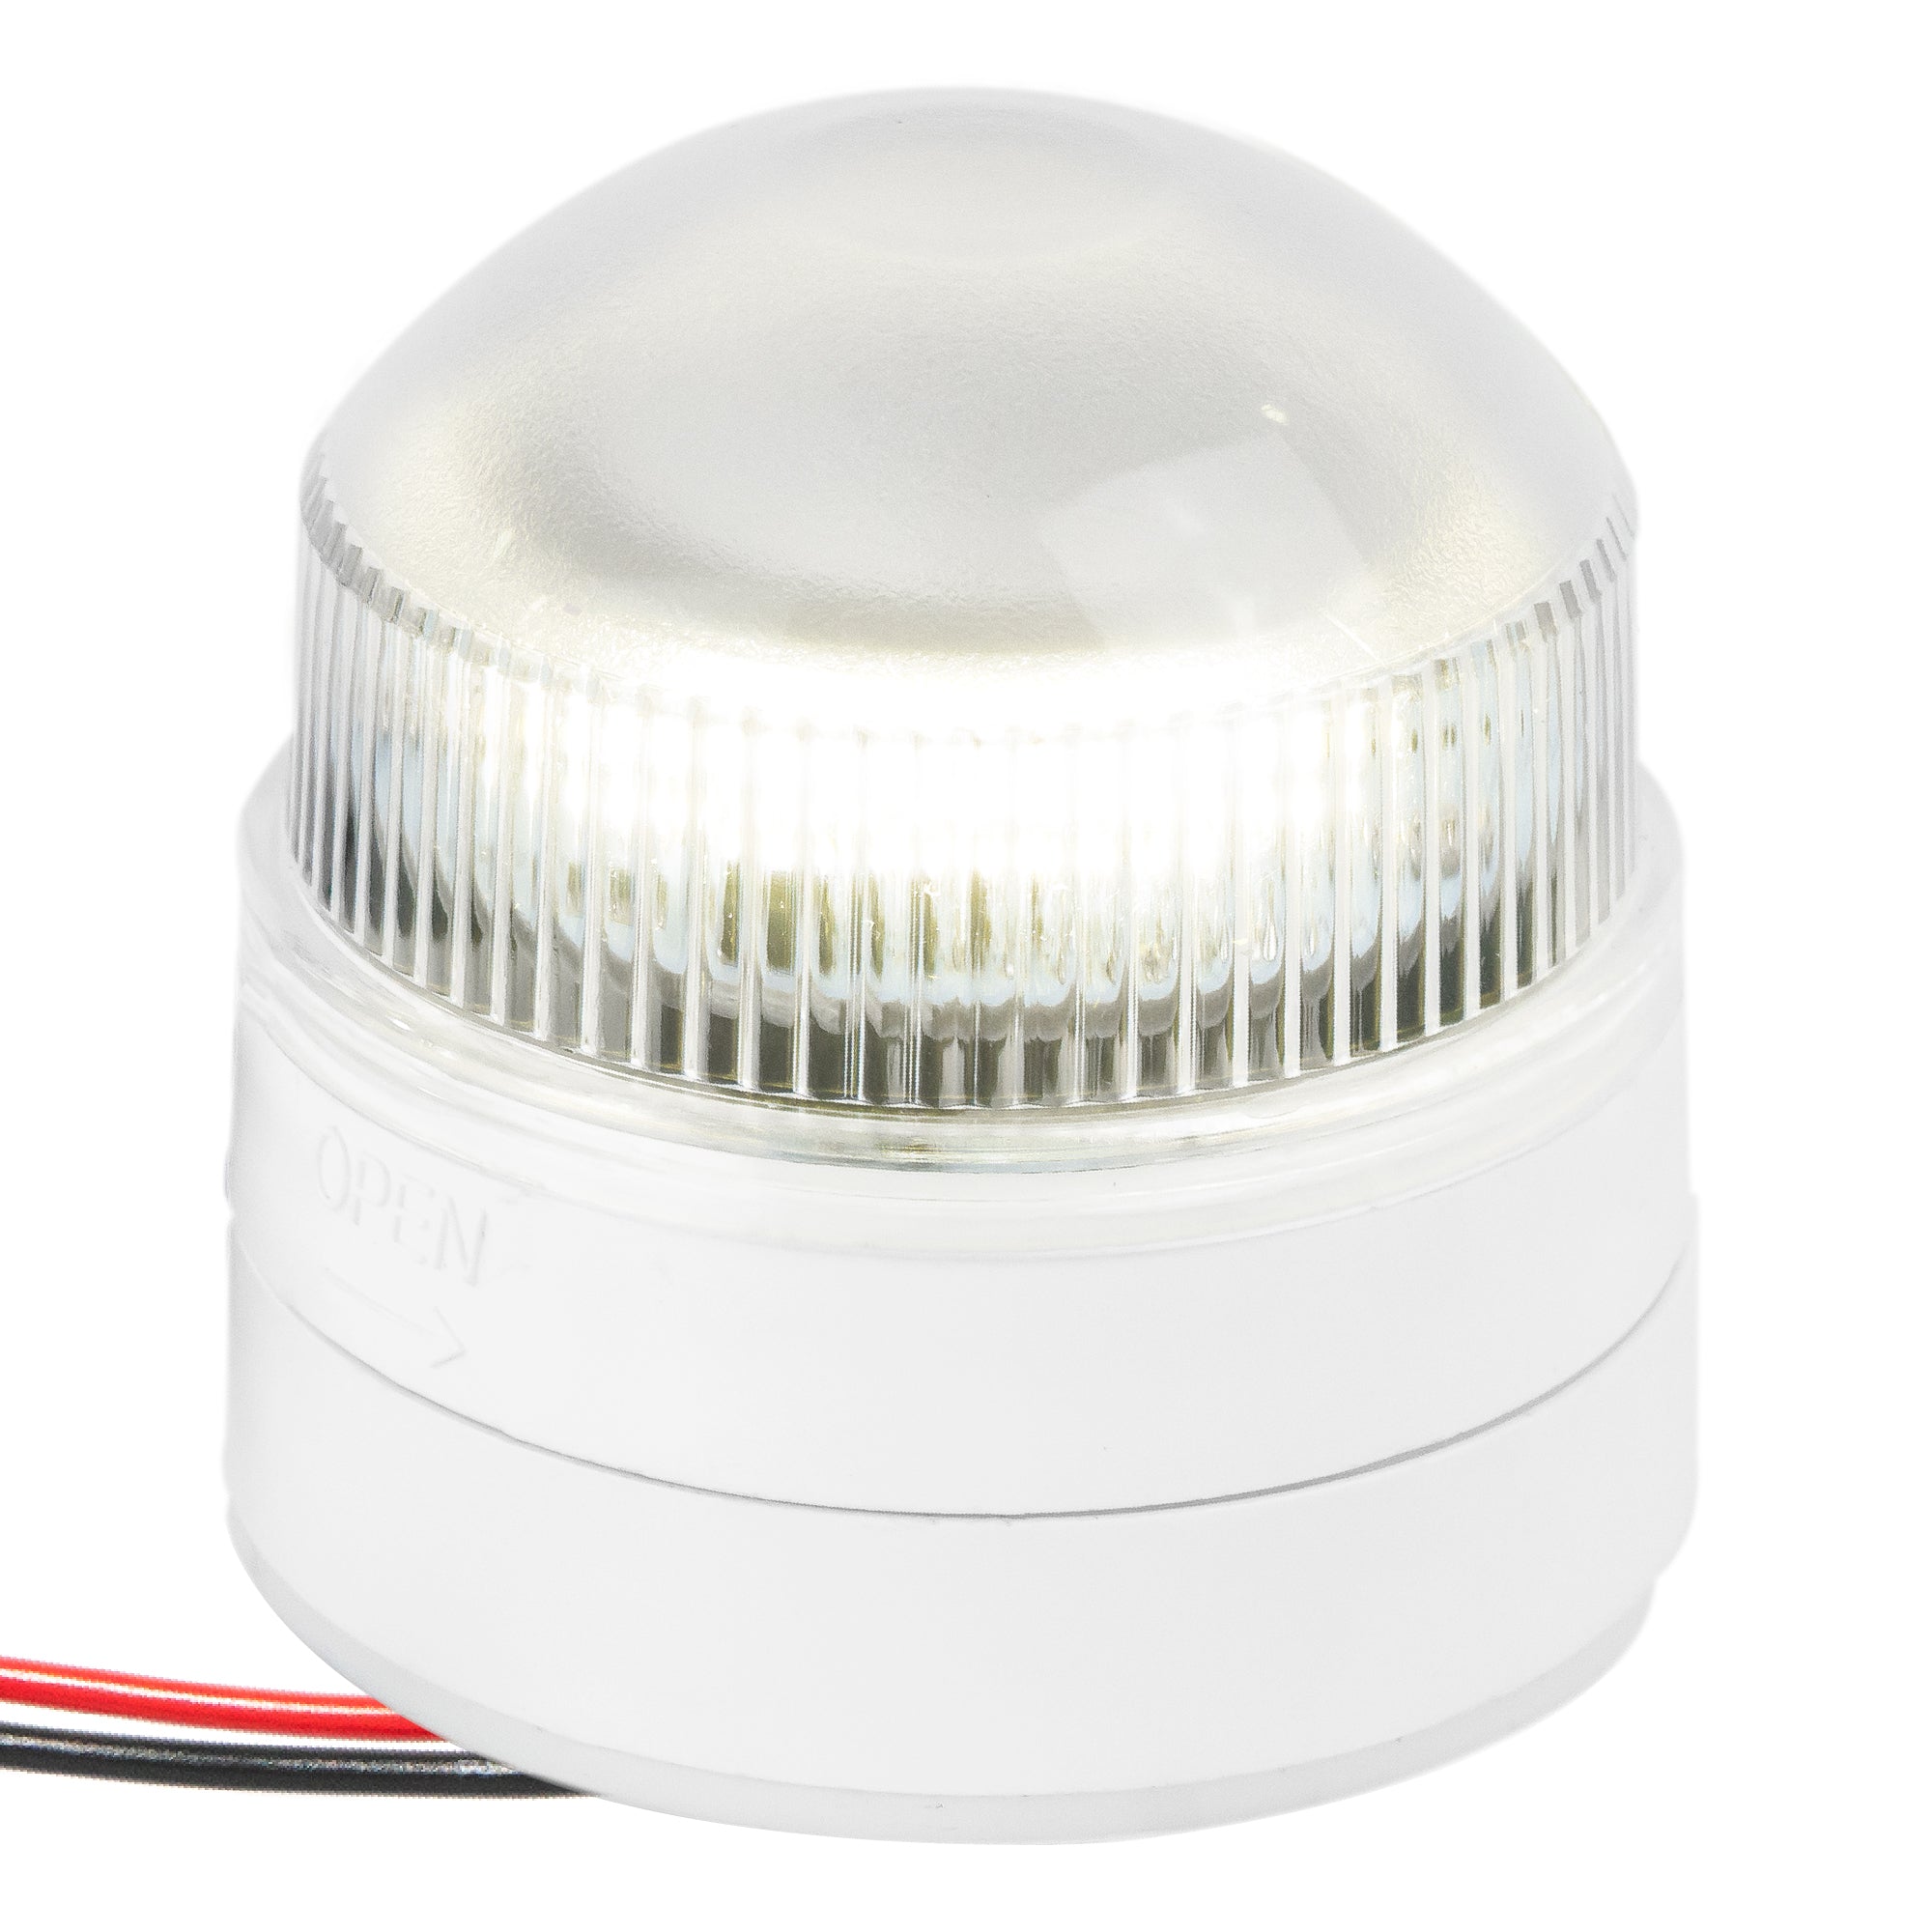 LED Anchor Navigation Lights, Fixed Mount, 2NM - FO4468